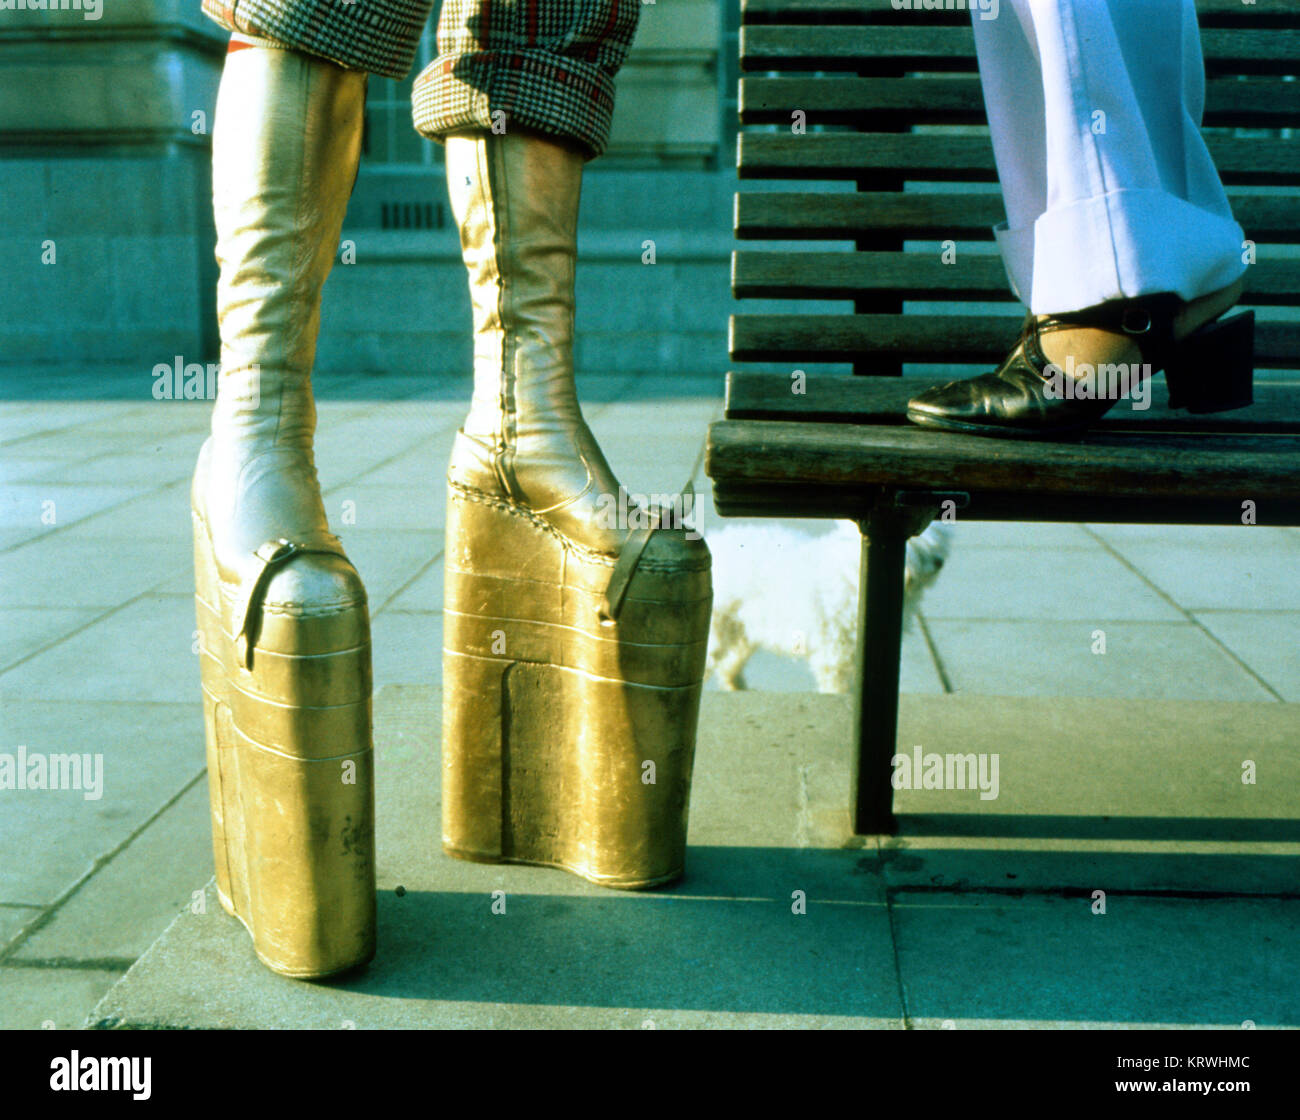 70's Shoes High Resolution Stock Photography and Images - Alamy